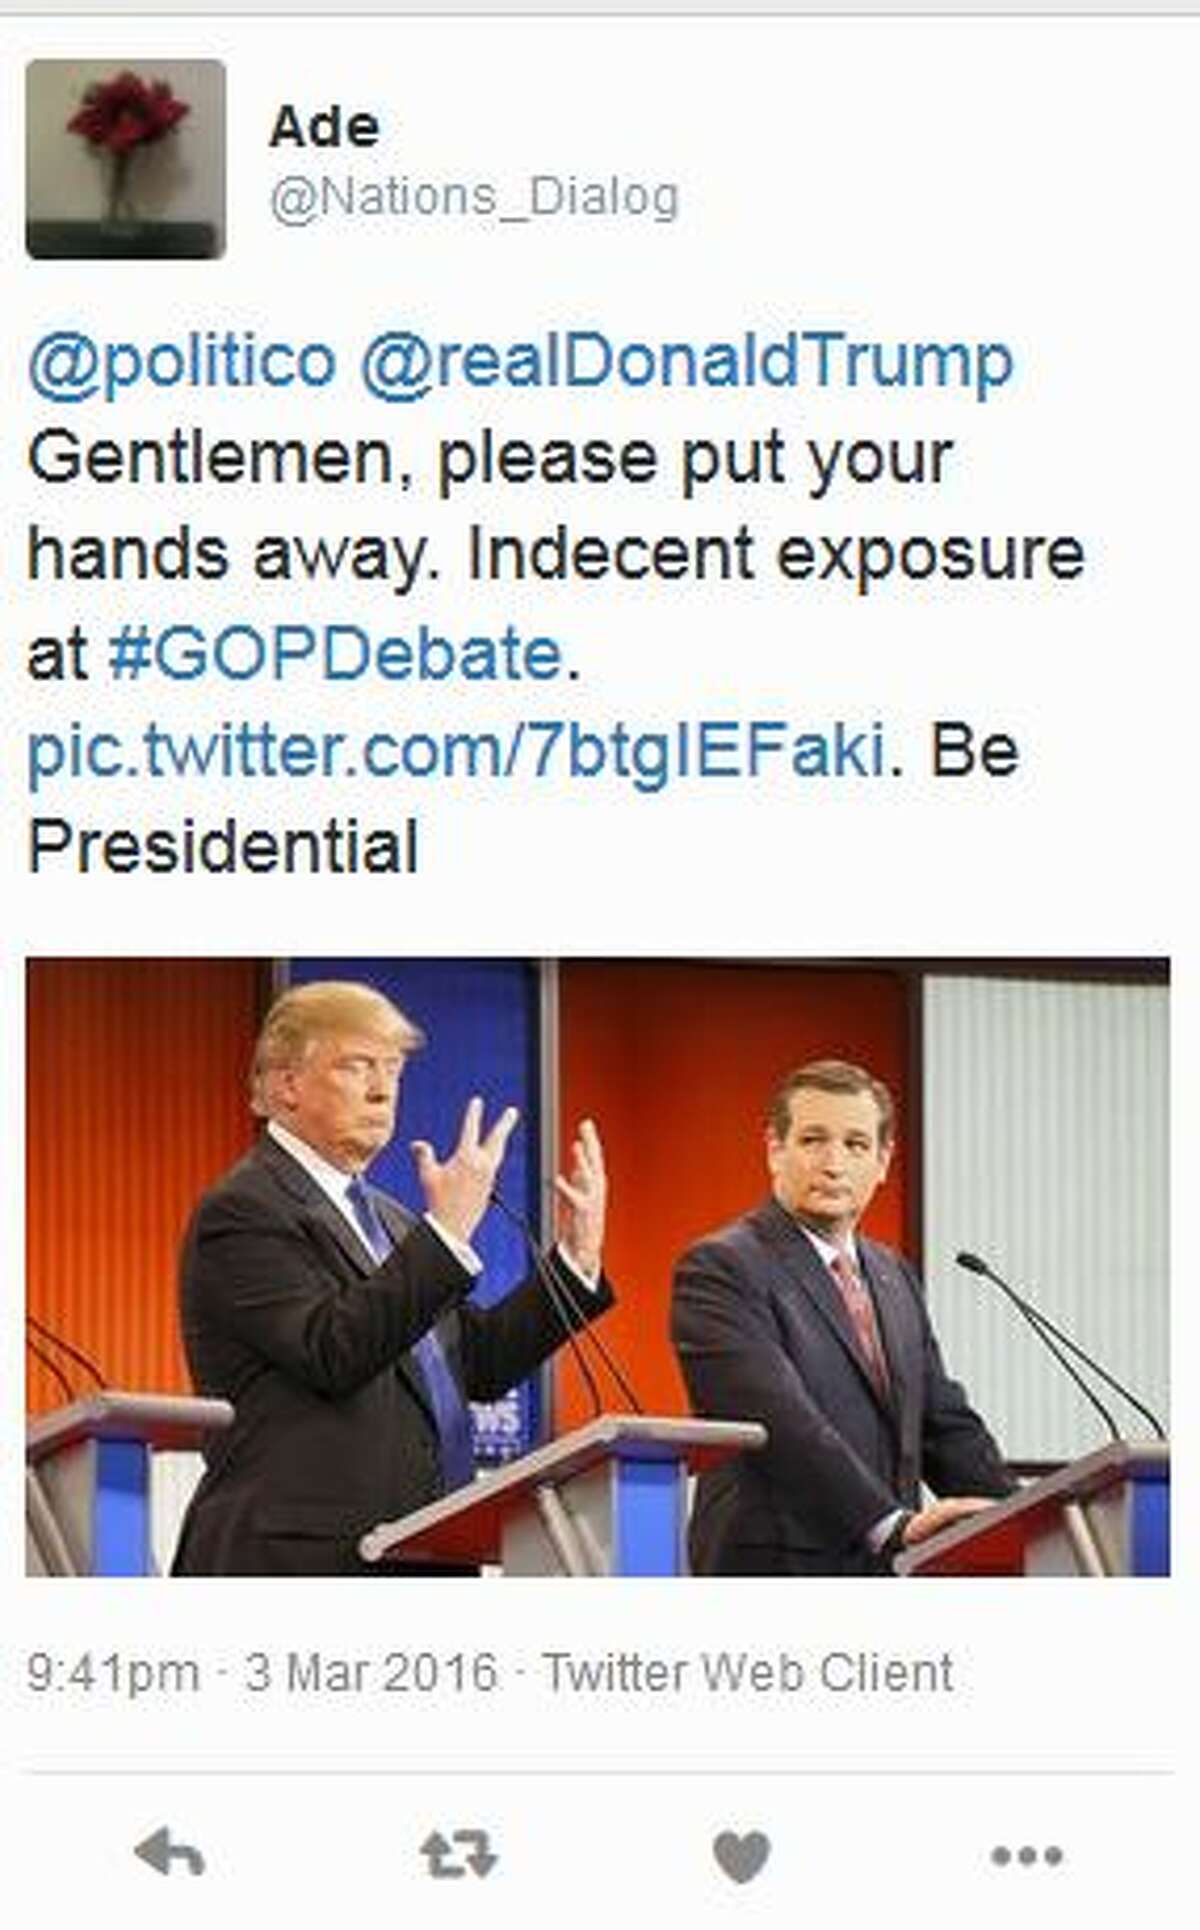 The #gopdebate just got NSFW when Donald Trump talked about his penis.